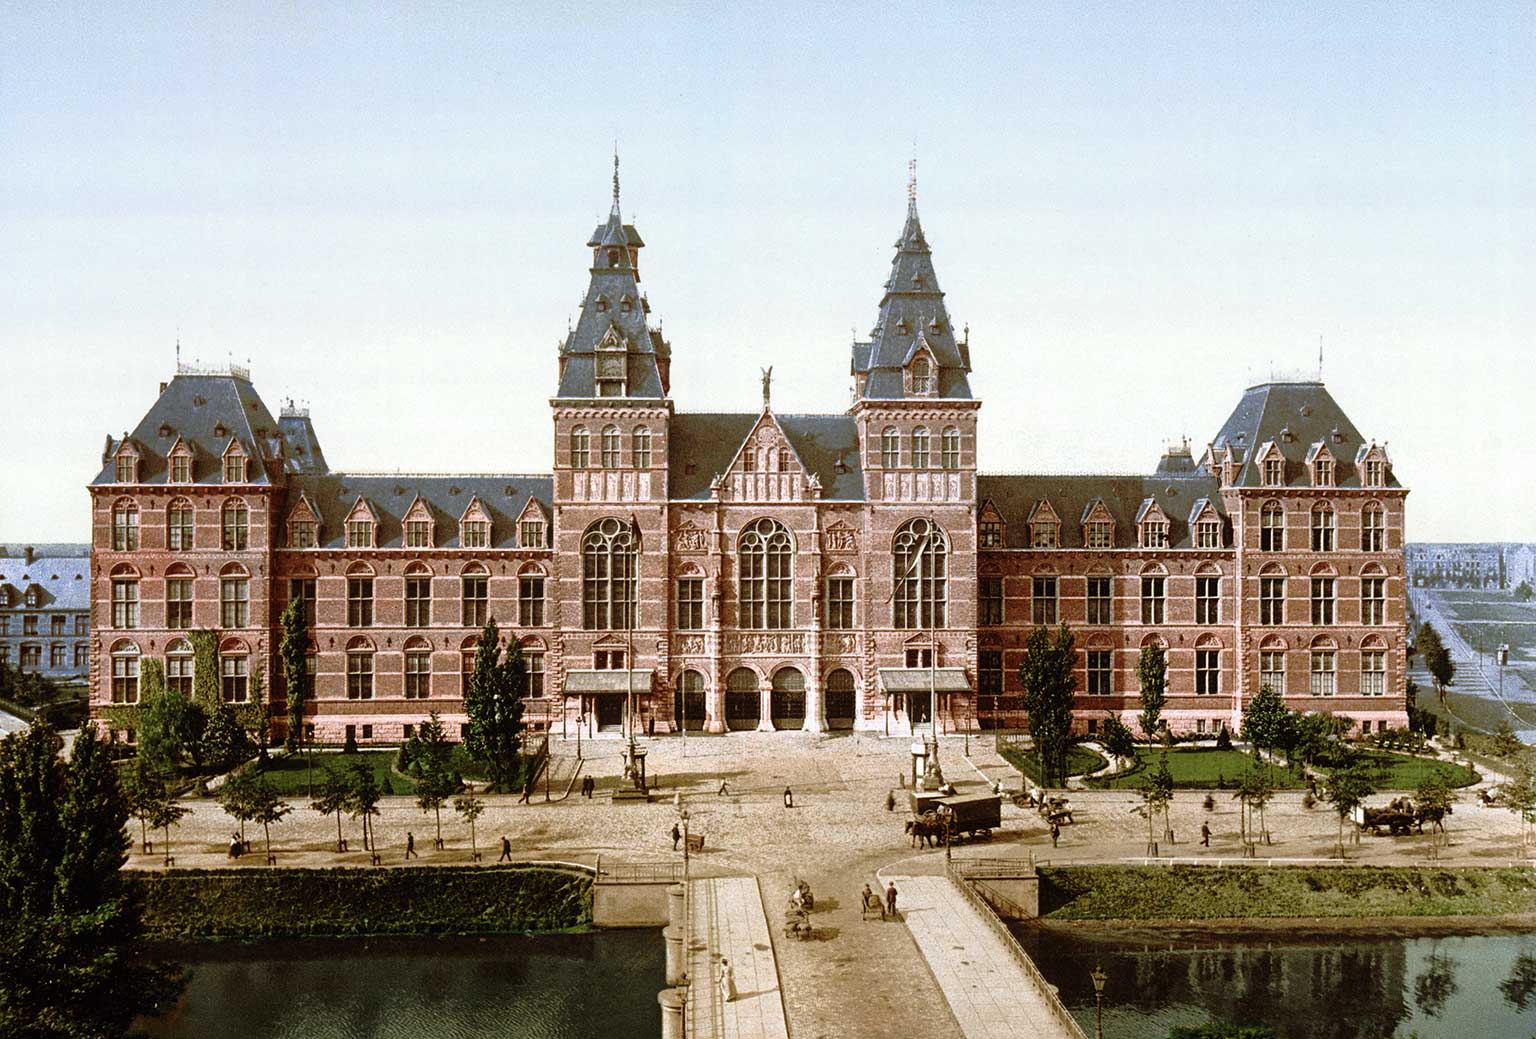 Rijksmuseum, Amsterdam, between 1890 and 1905 on a photochrom picture